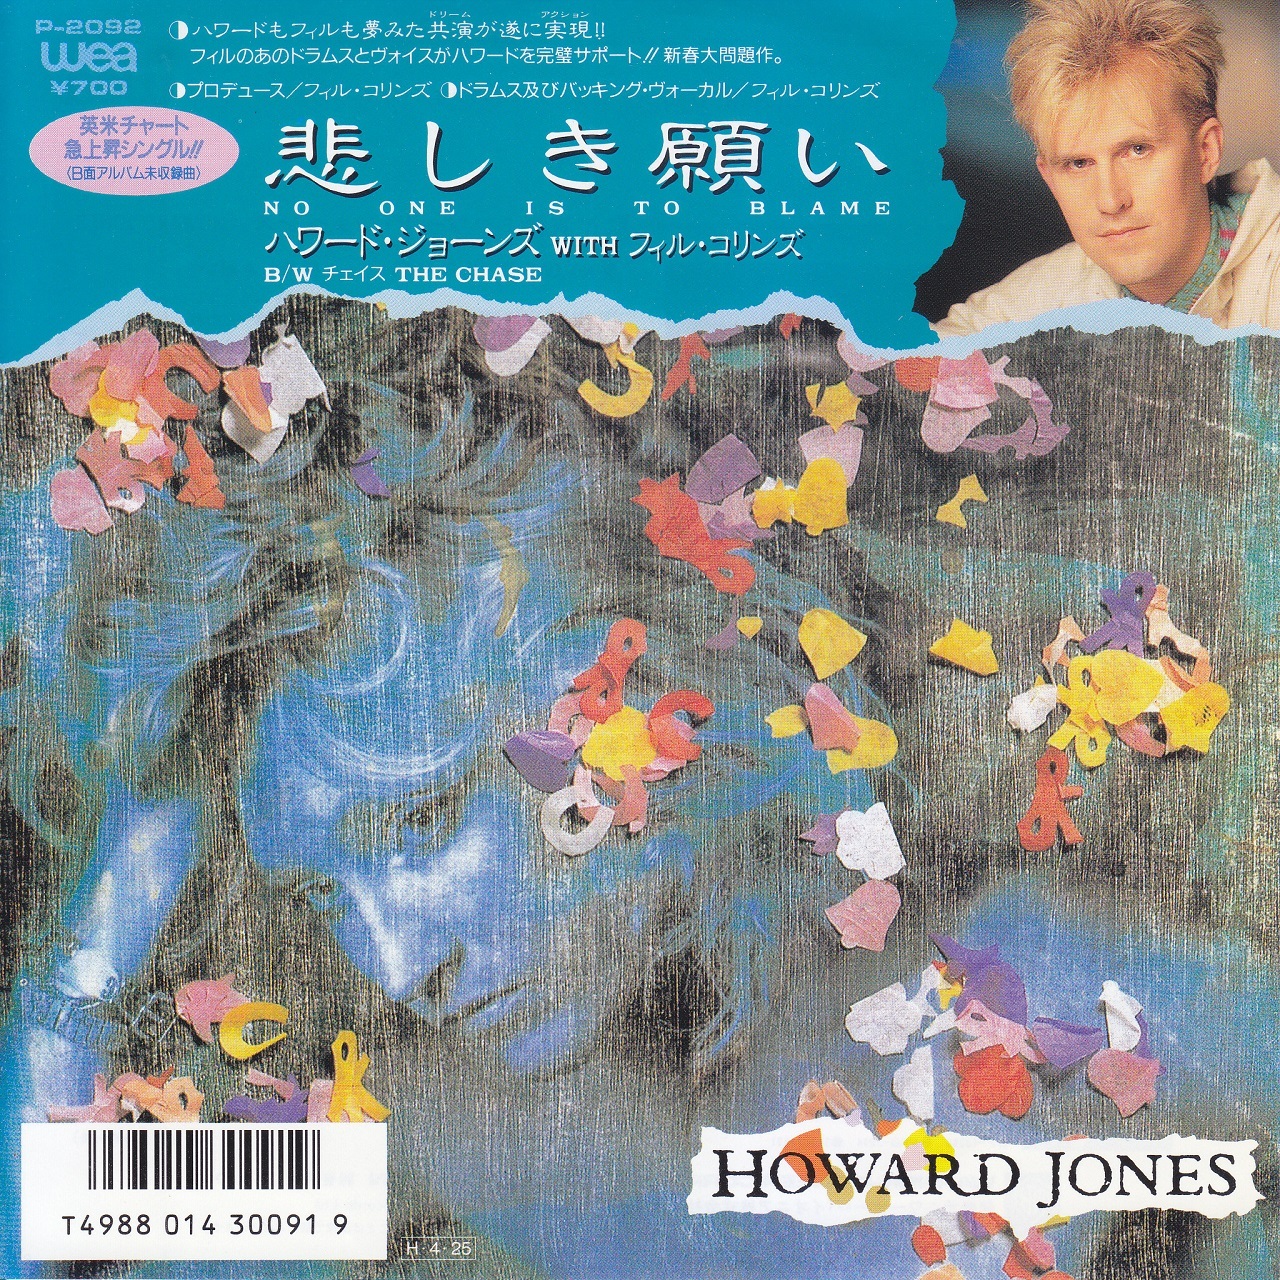 7inch Howard Jones With Phil Collins No One Is To Blame 悲しき願い ハワード ジョーンズwithフィル コリンズ 1986 03 45rpm 45rpm